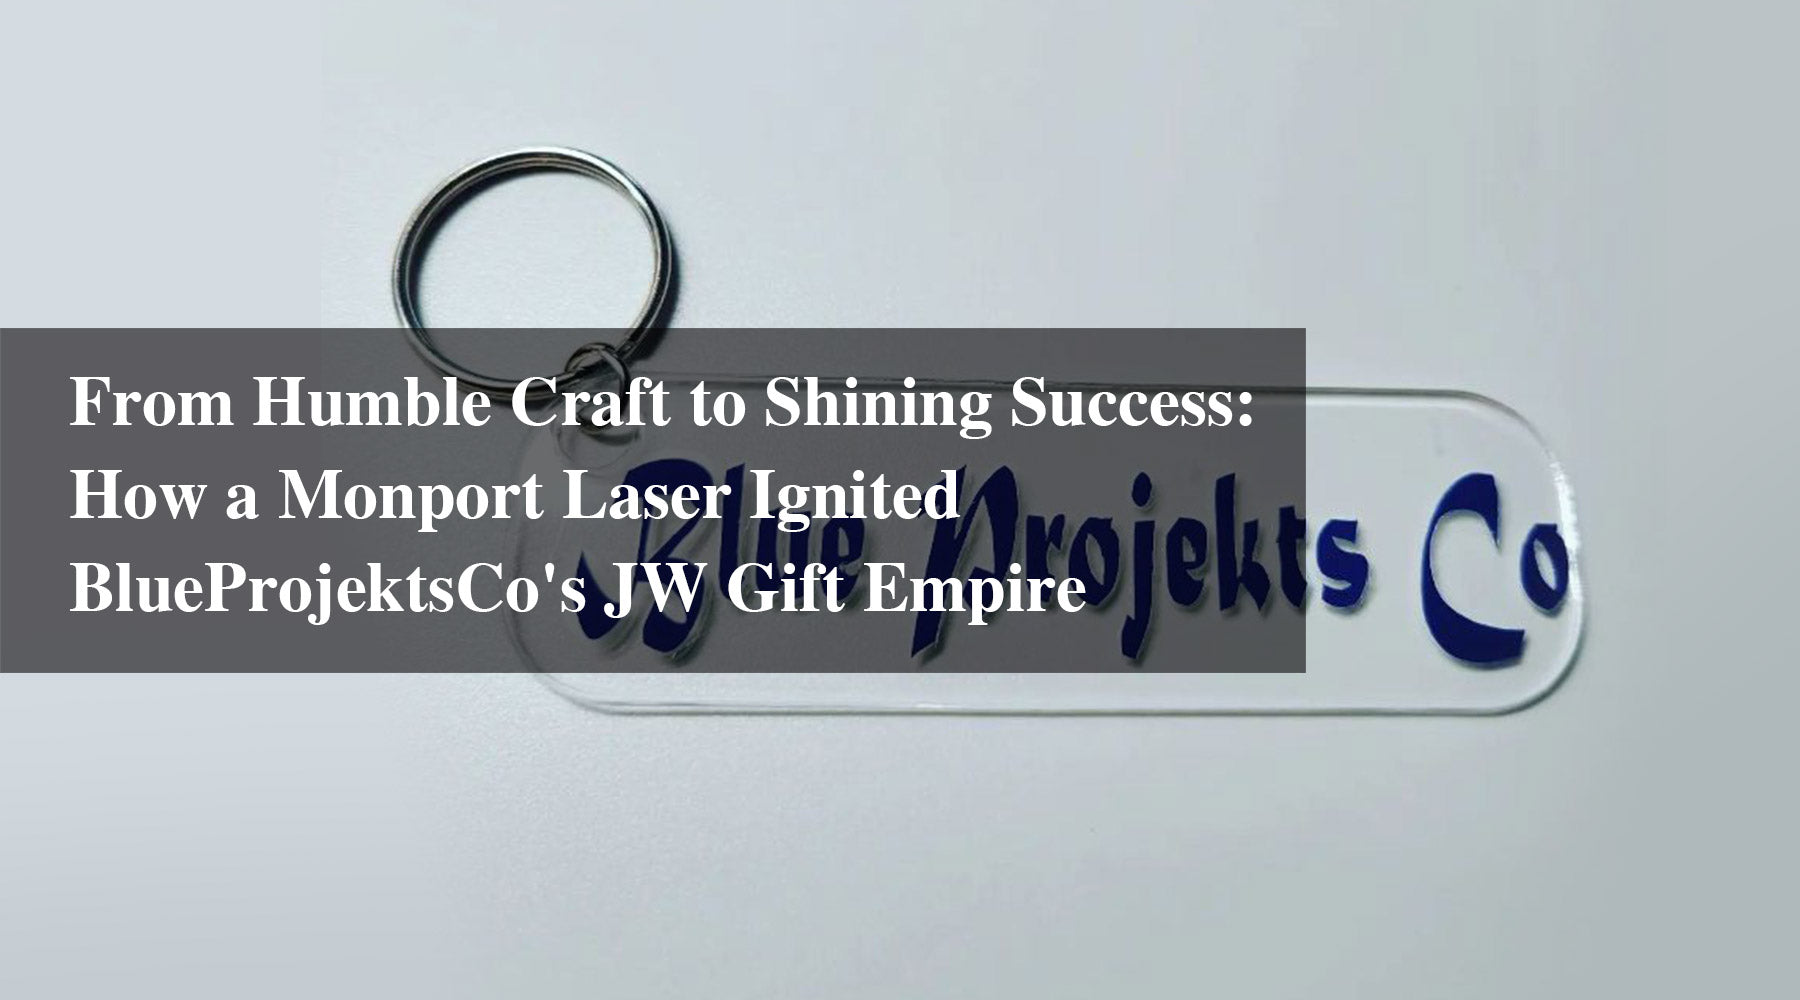 From Humble Craft to Shining Success: How a Monport Laser Ignited BlueProjektsCo's JW Gift Empire